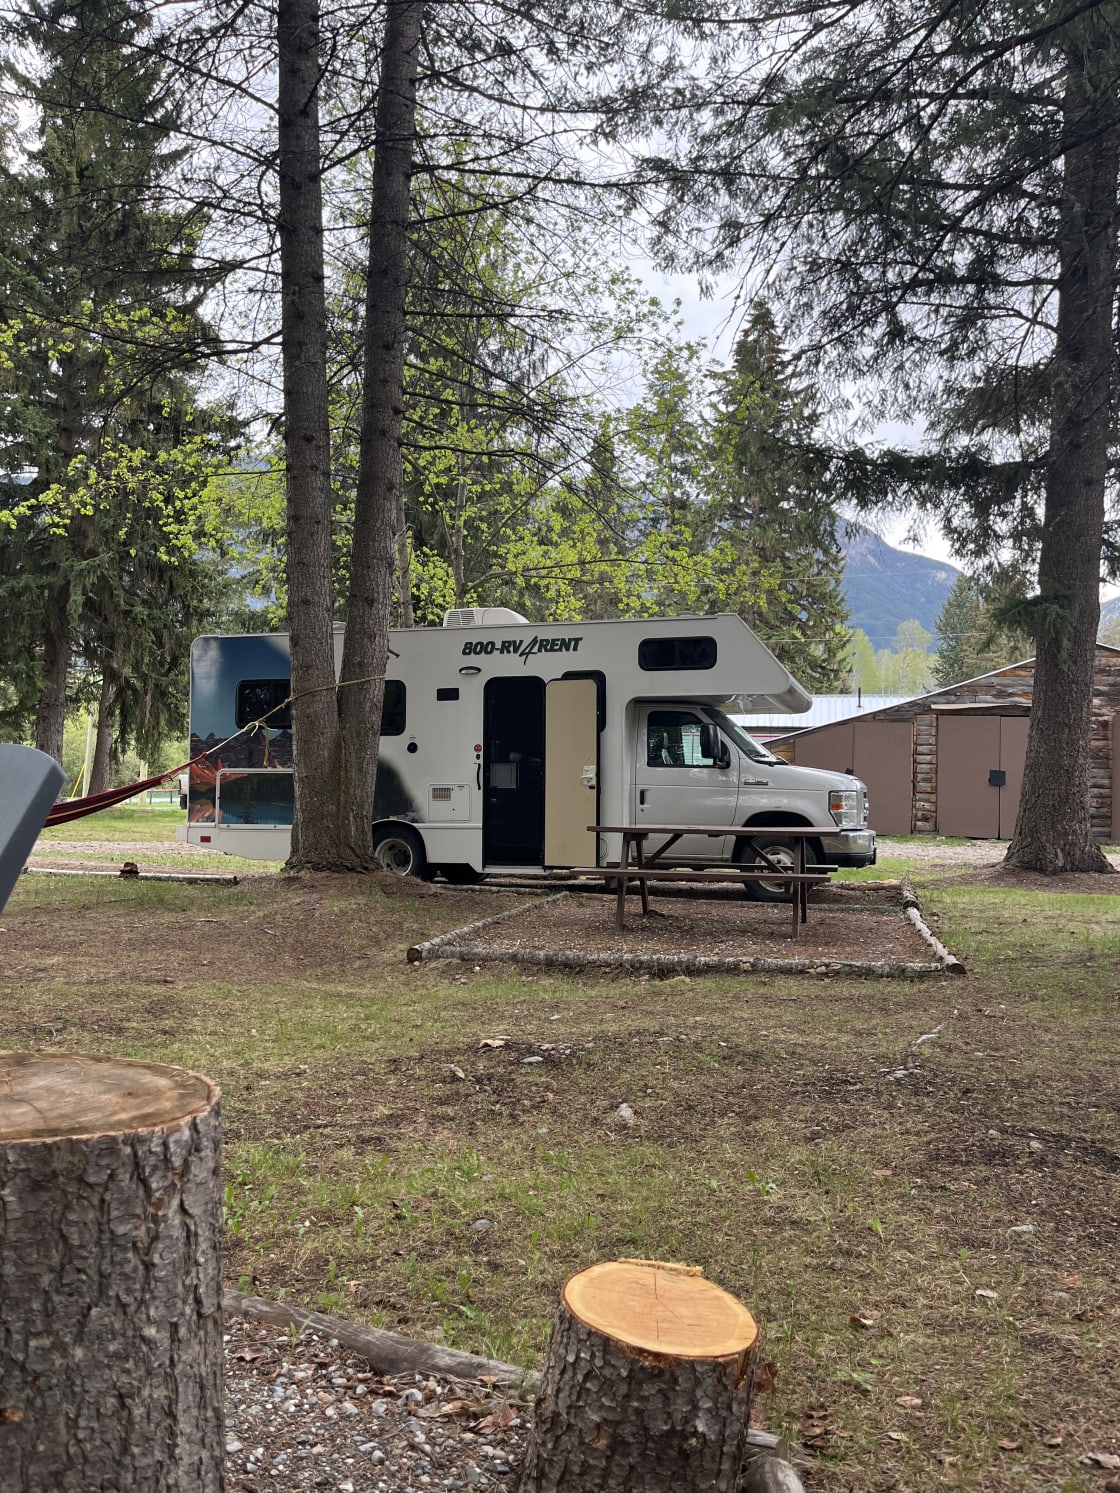 JCB Cabins and campground